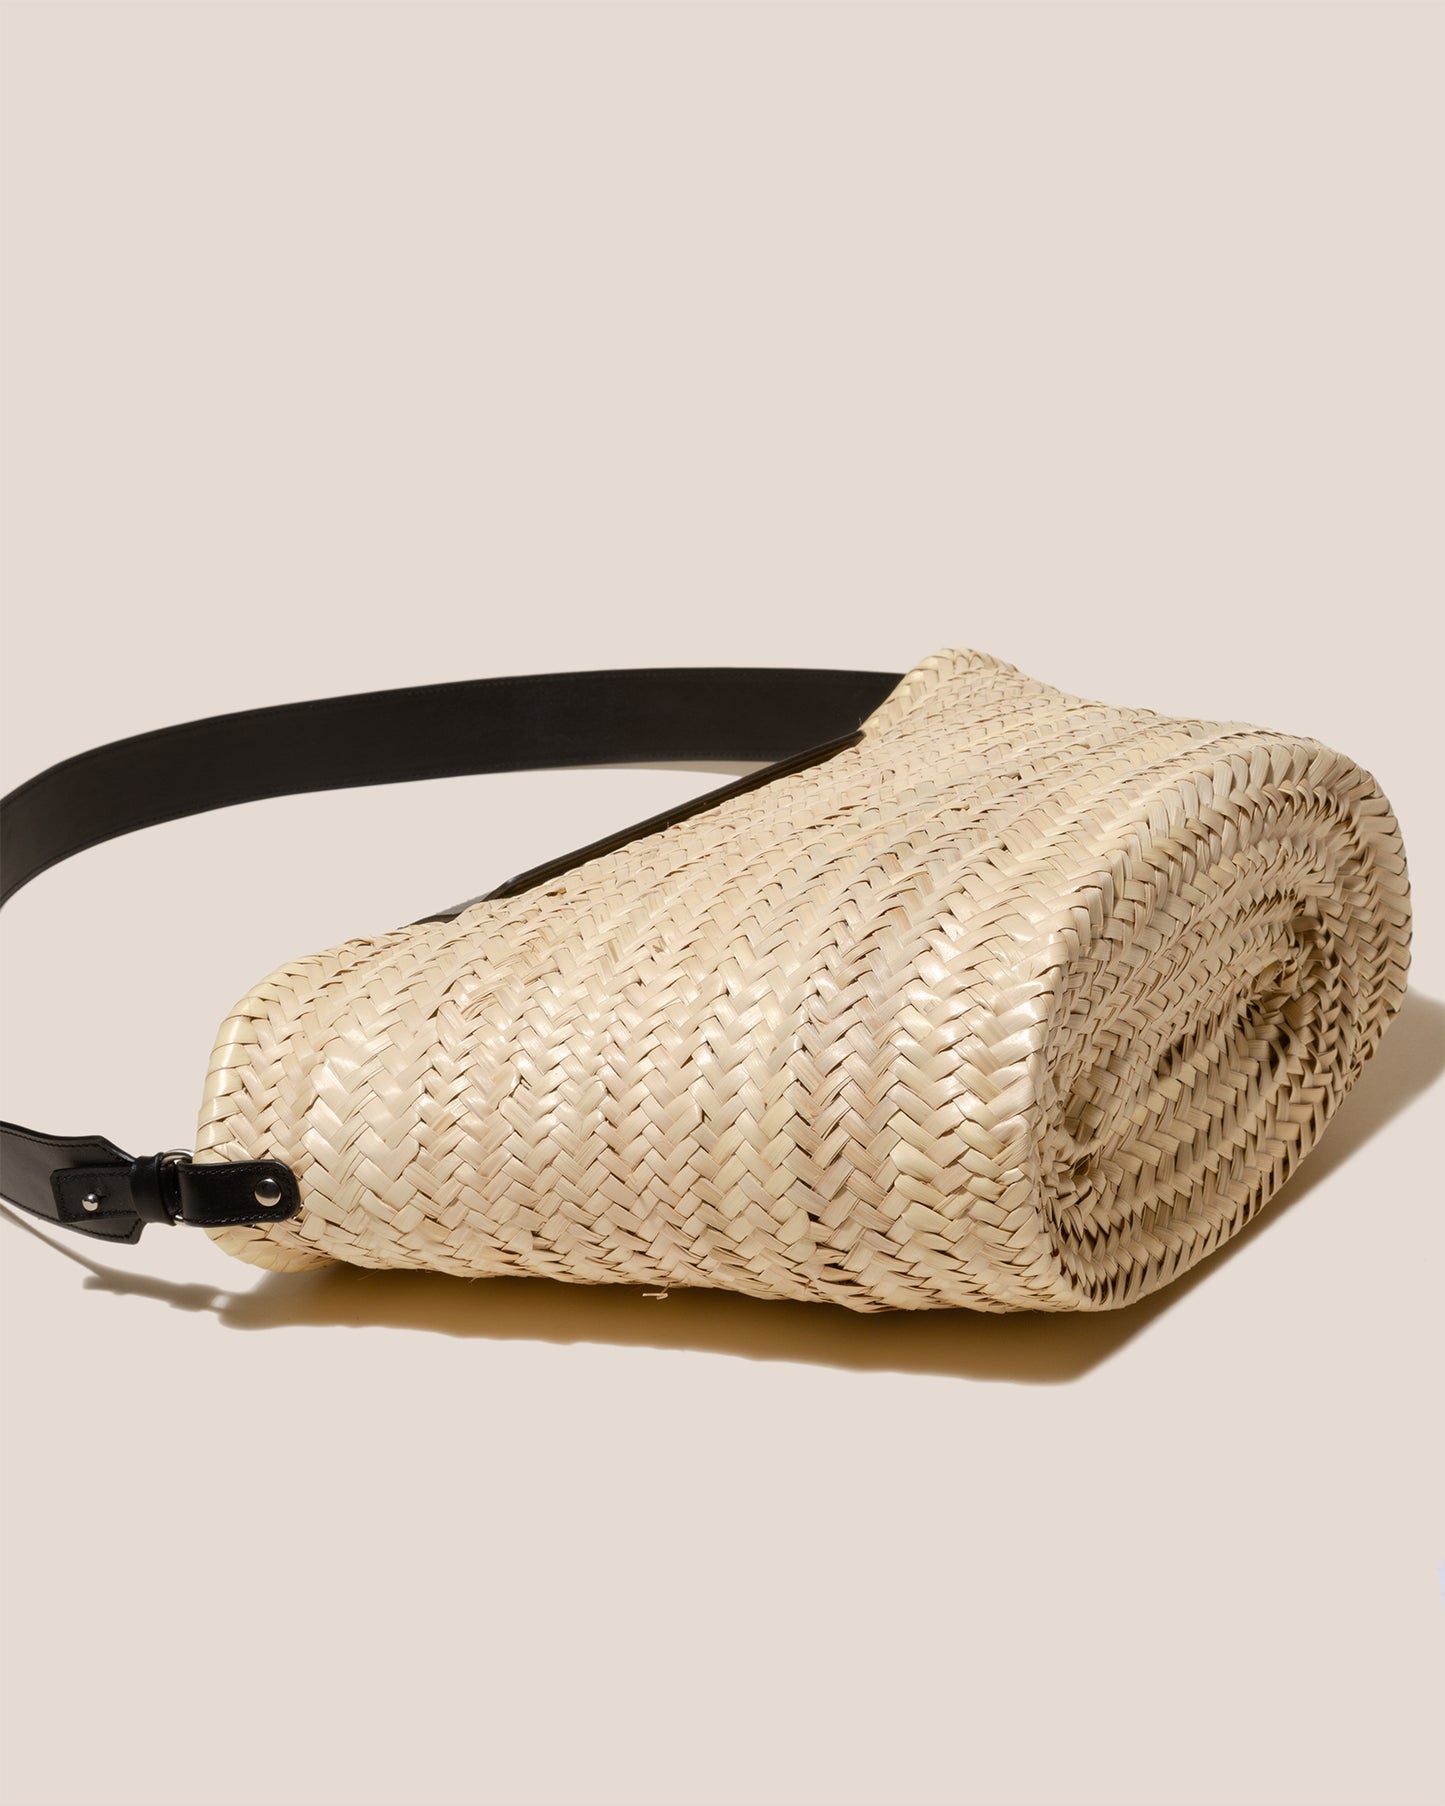 CABAS - Handwoven Straw Tote Bag